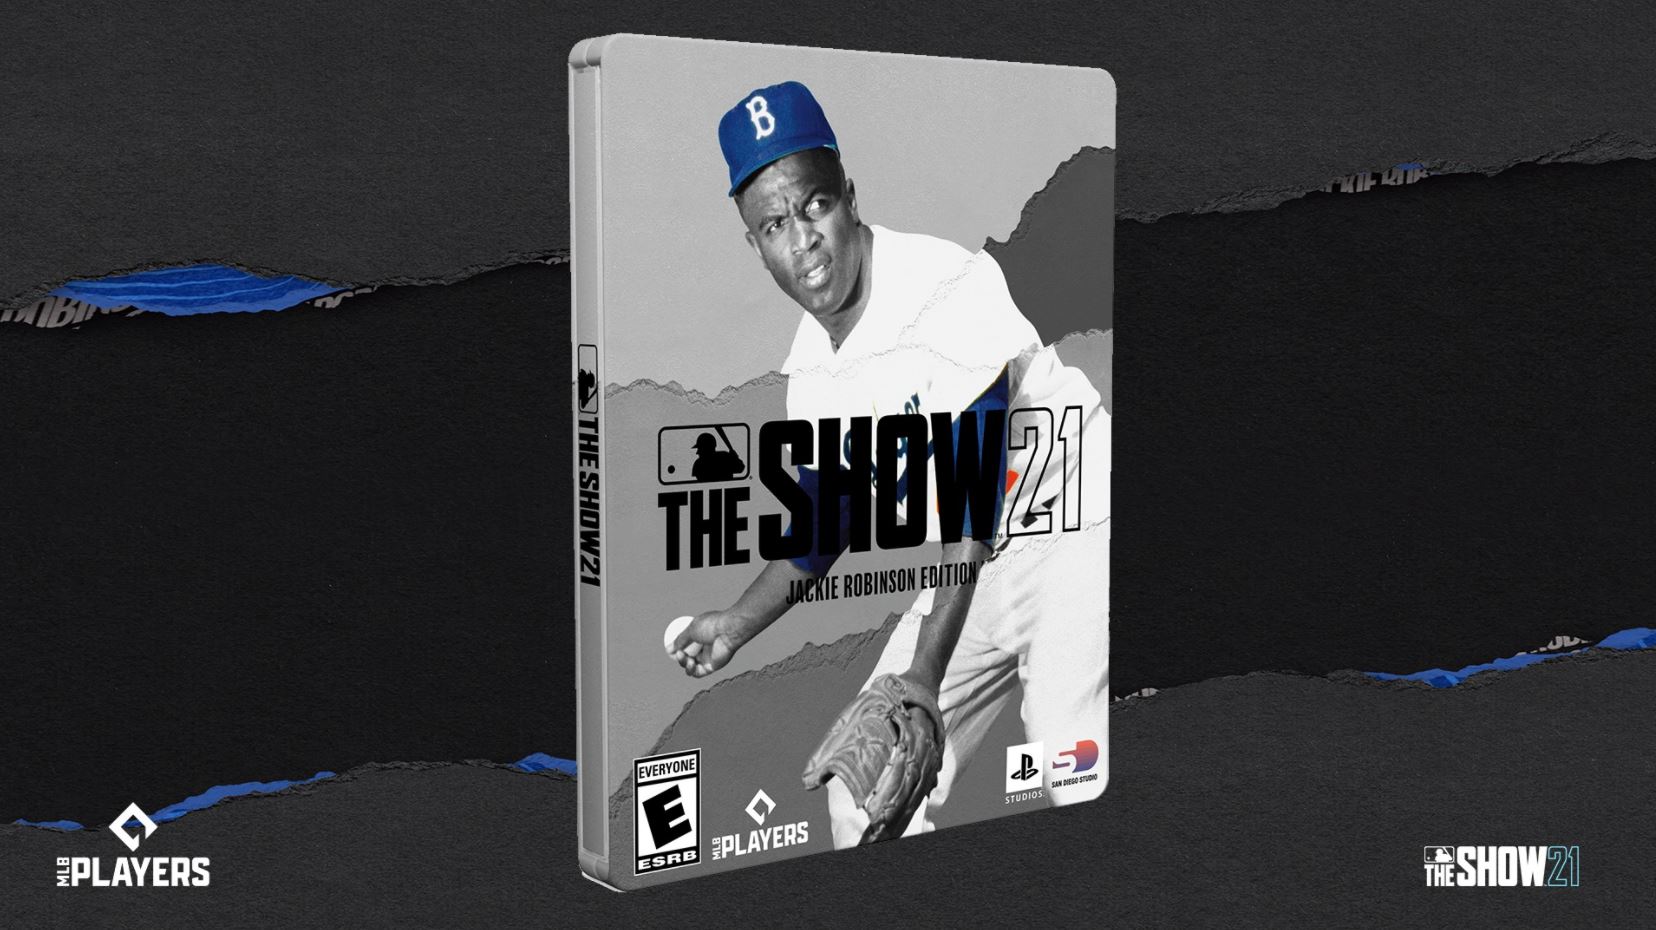 mlb-the-show-21-unveils-jackie-robinson-collectors-edition-with-early-access-and-a-free-upgrade-for-ps4-owners